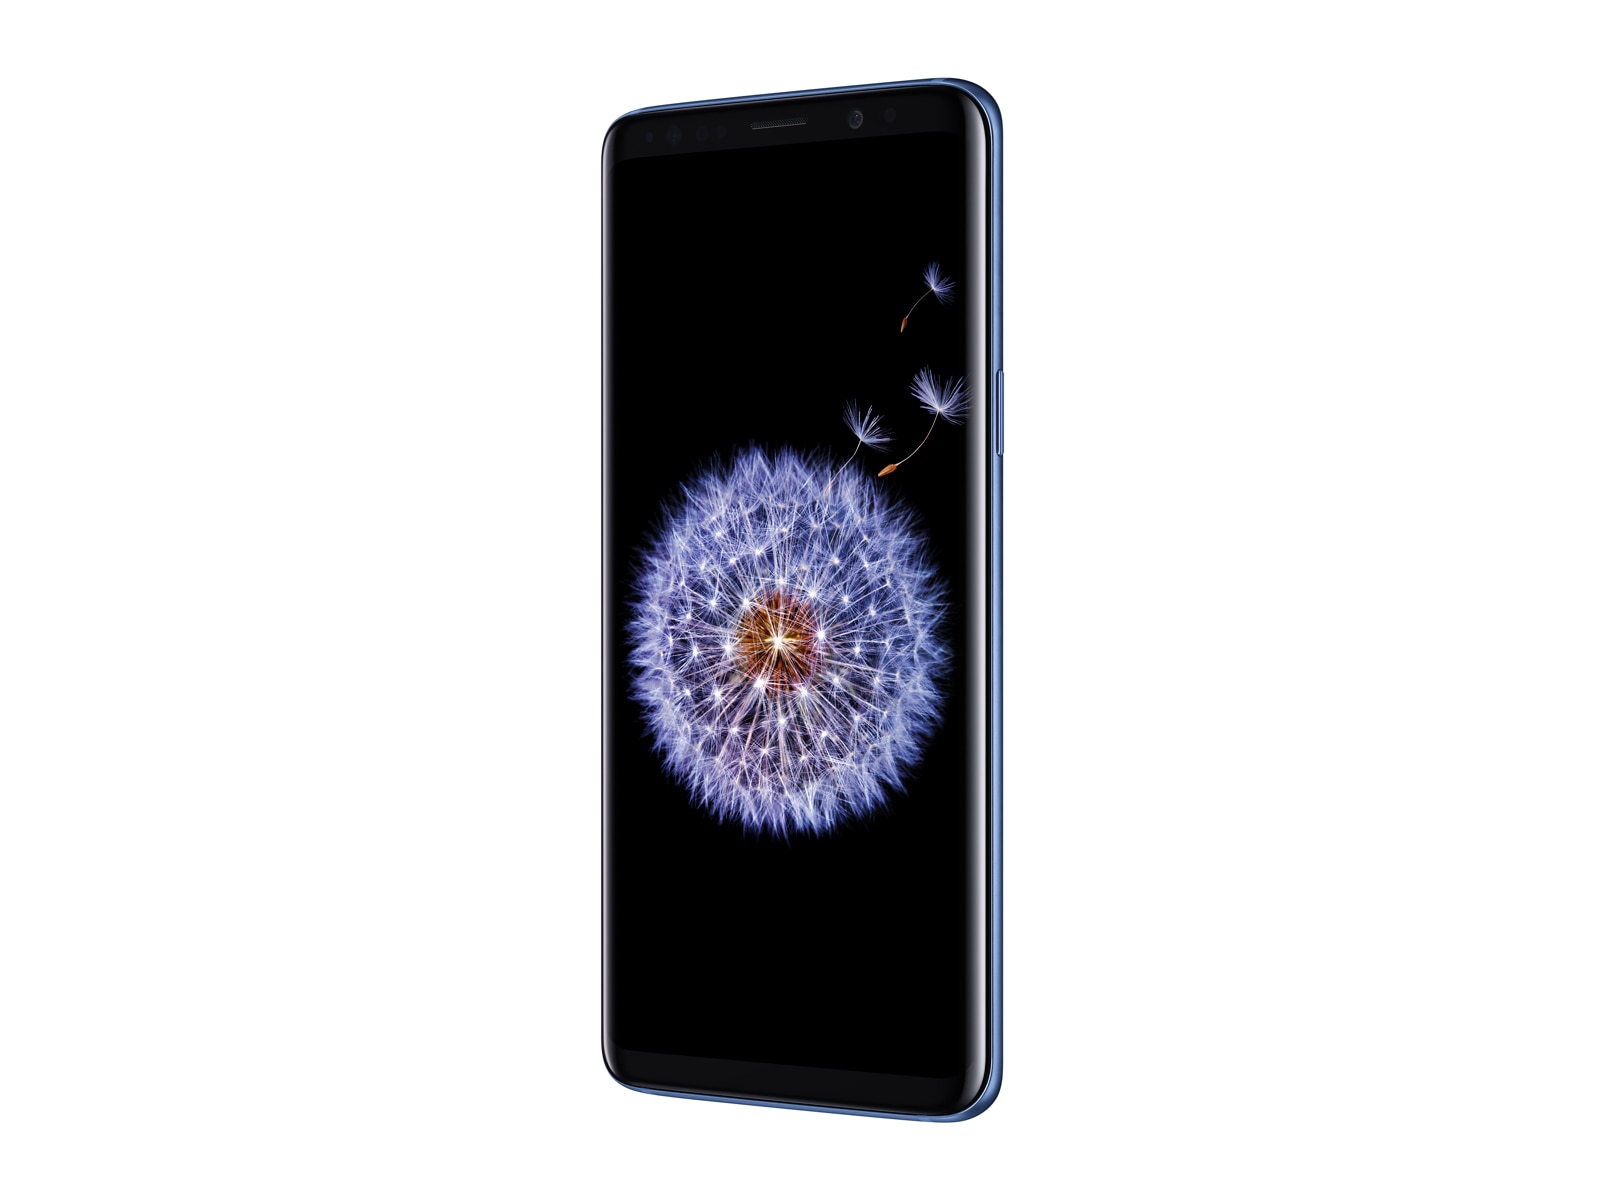 Thumbnail image of Galaxy S9 64GB (US Cellular)